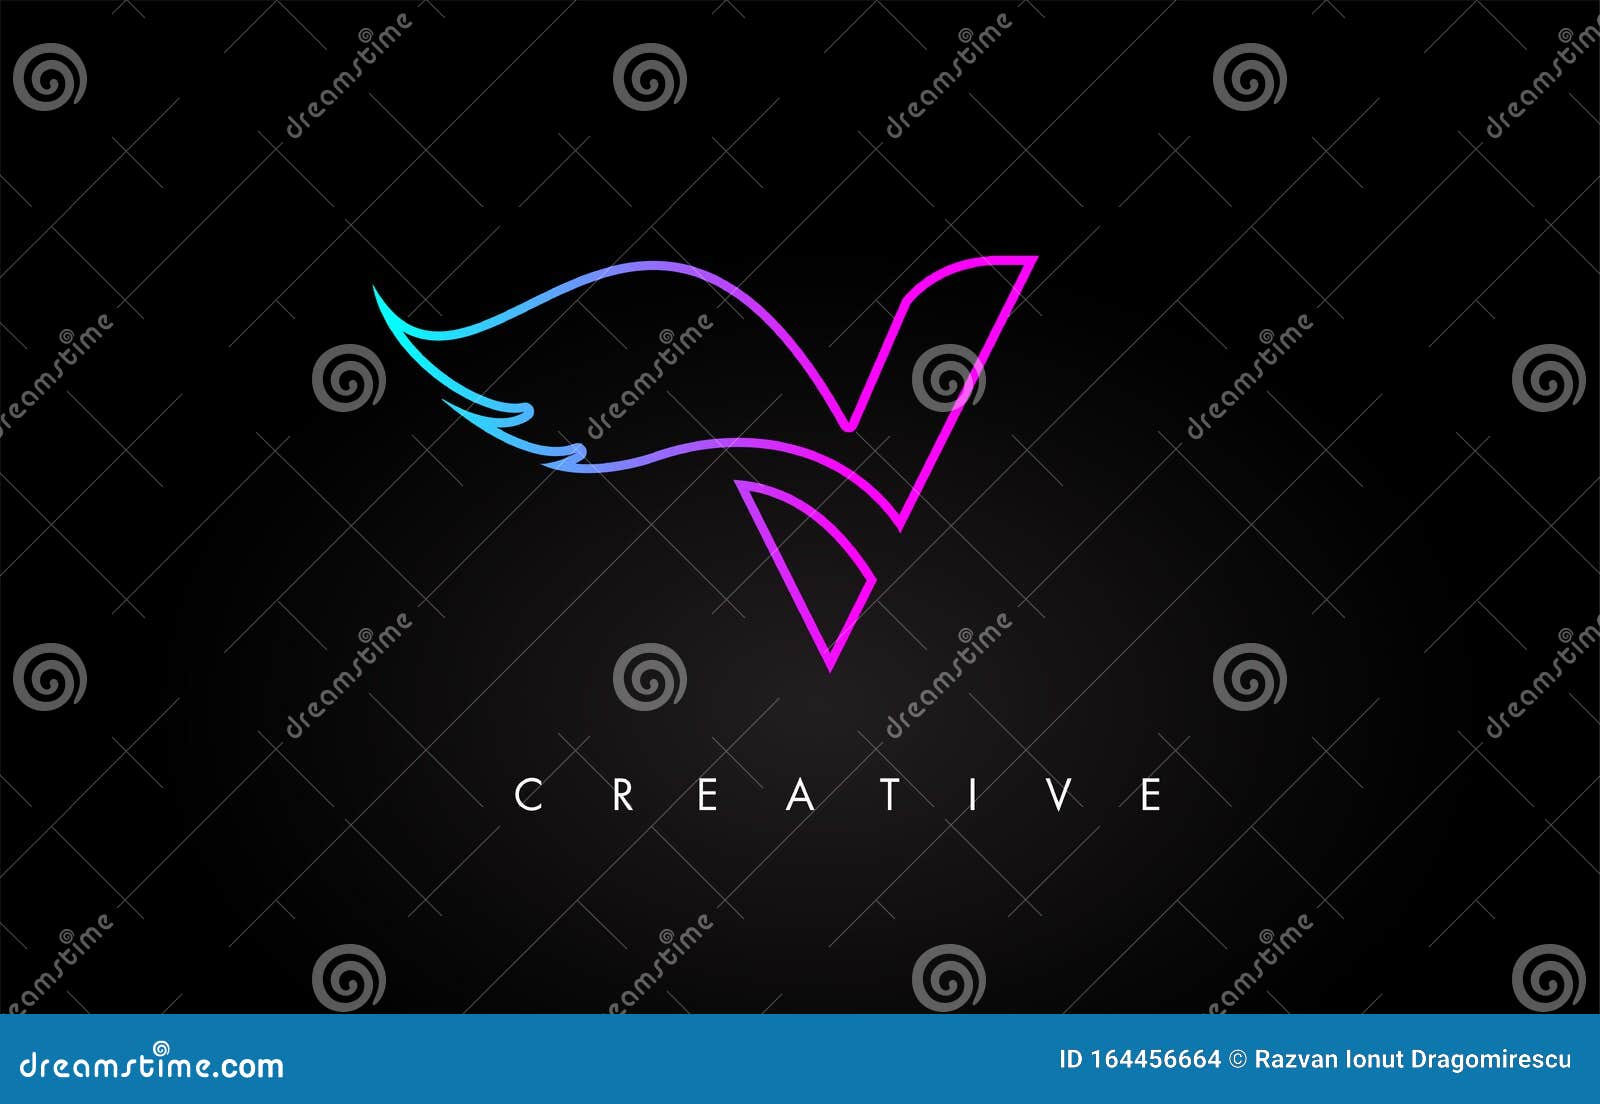 Neon V Letter Logo Icon Design With Creative Wing In Blue Purple Magenta Colors Stock Vector Illustration Of Typeface Element